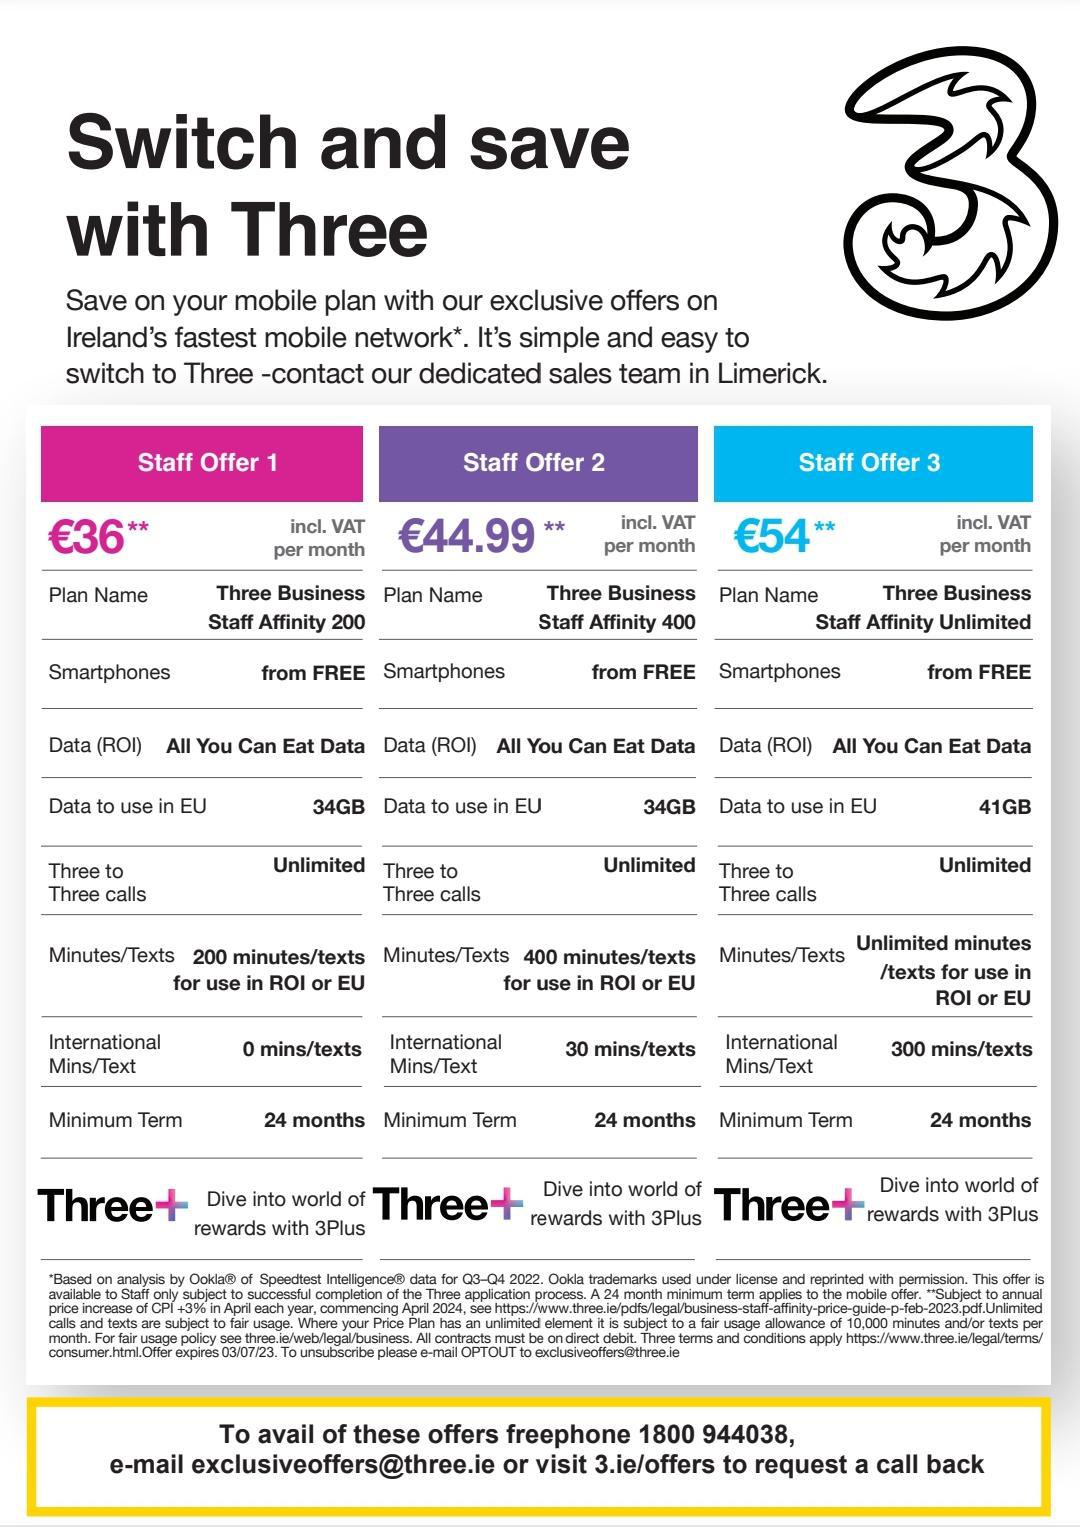 Mobile Phone & Home Broadband Offers with 3